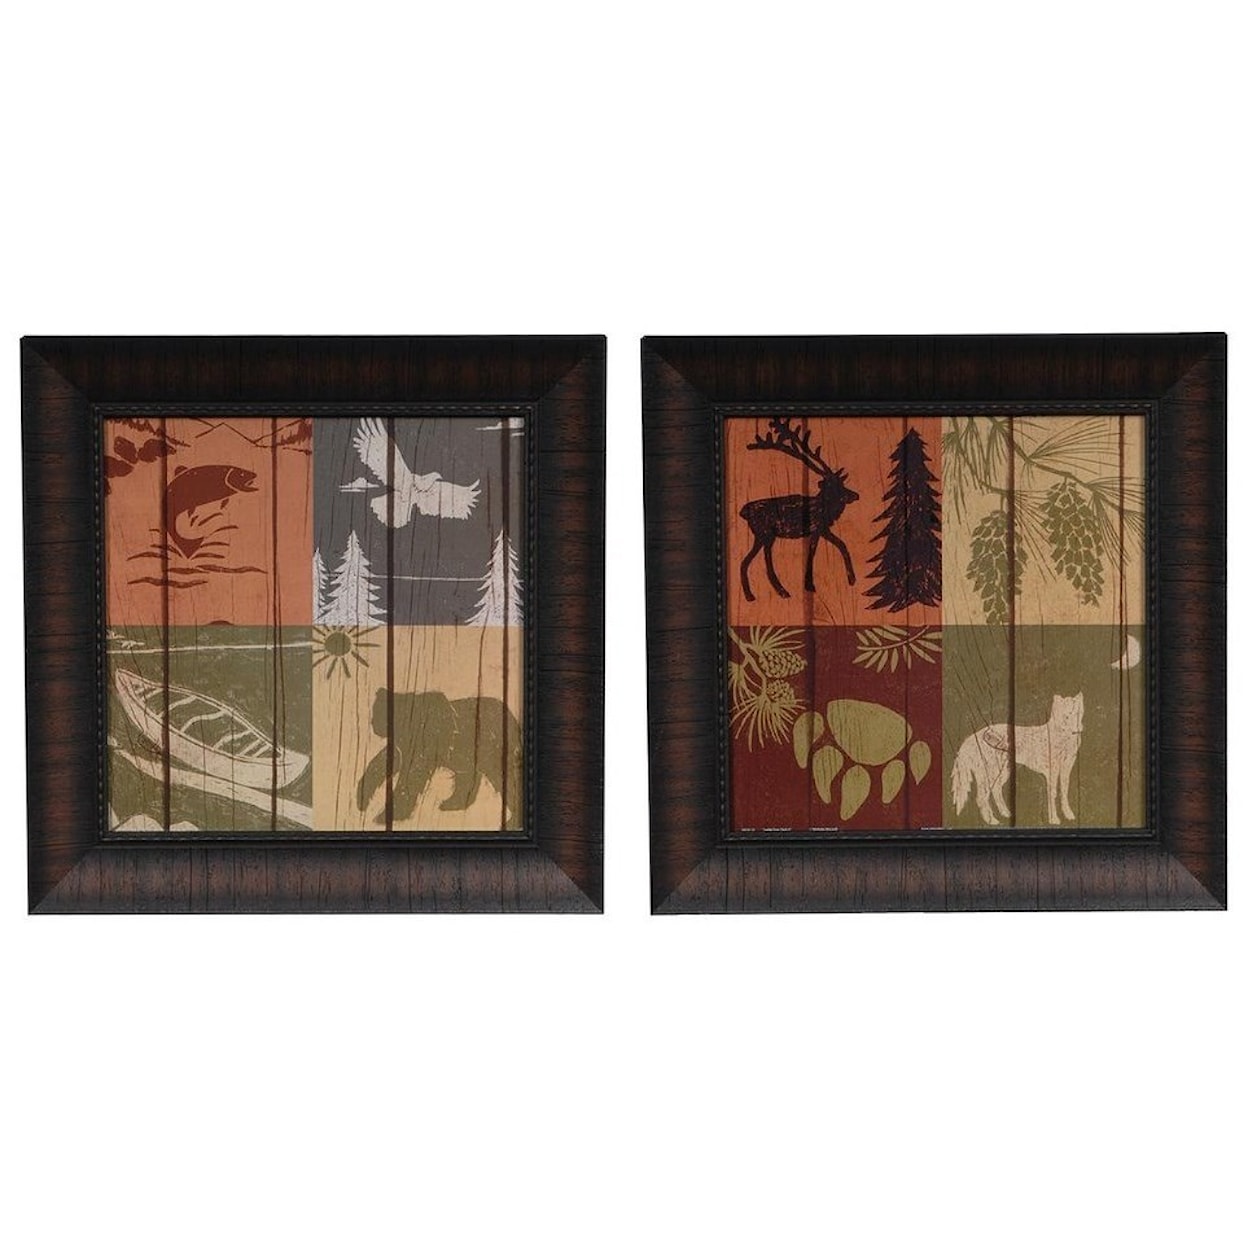 Crestview Collection Prints and Paintings Lodge  Four Pack 1&2 (Pair)